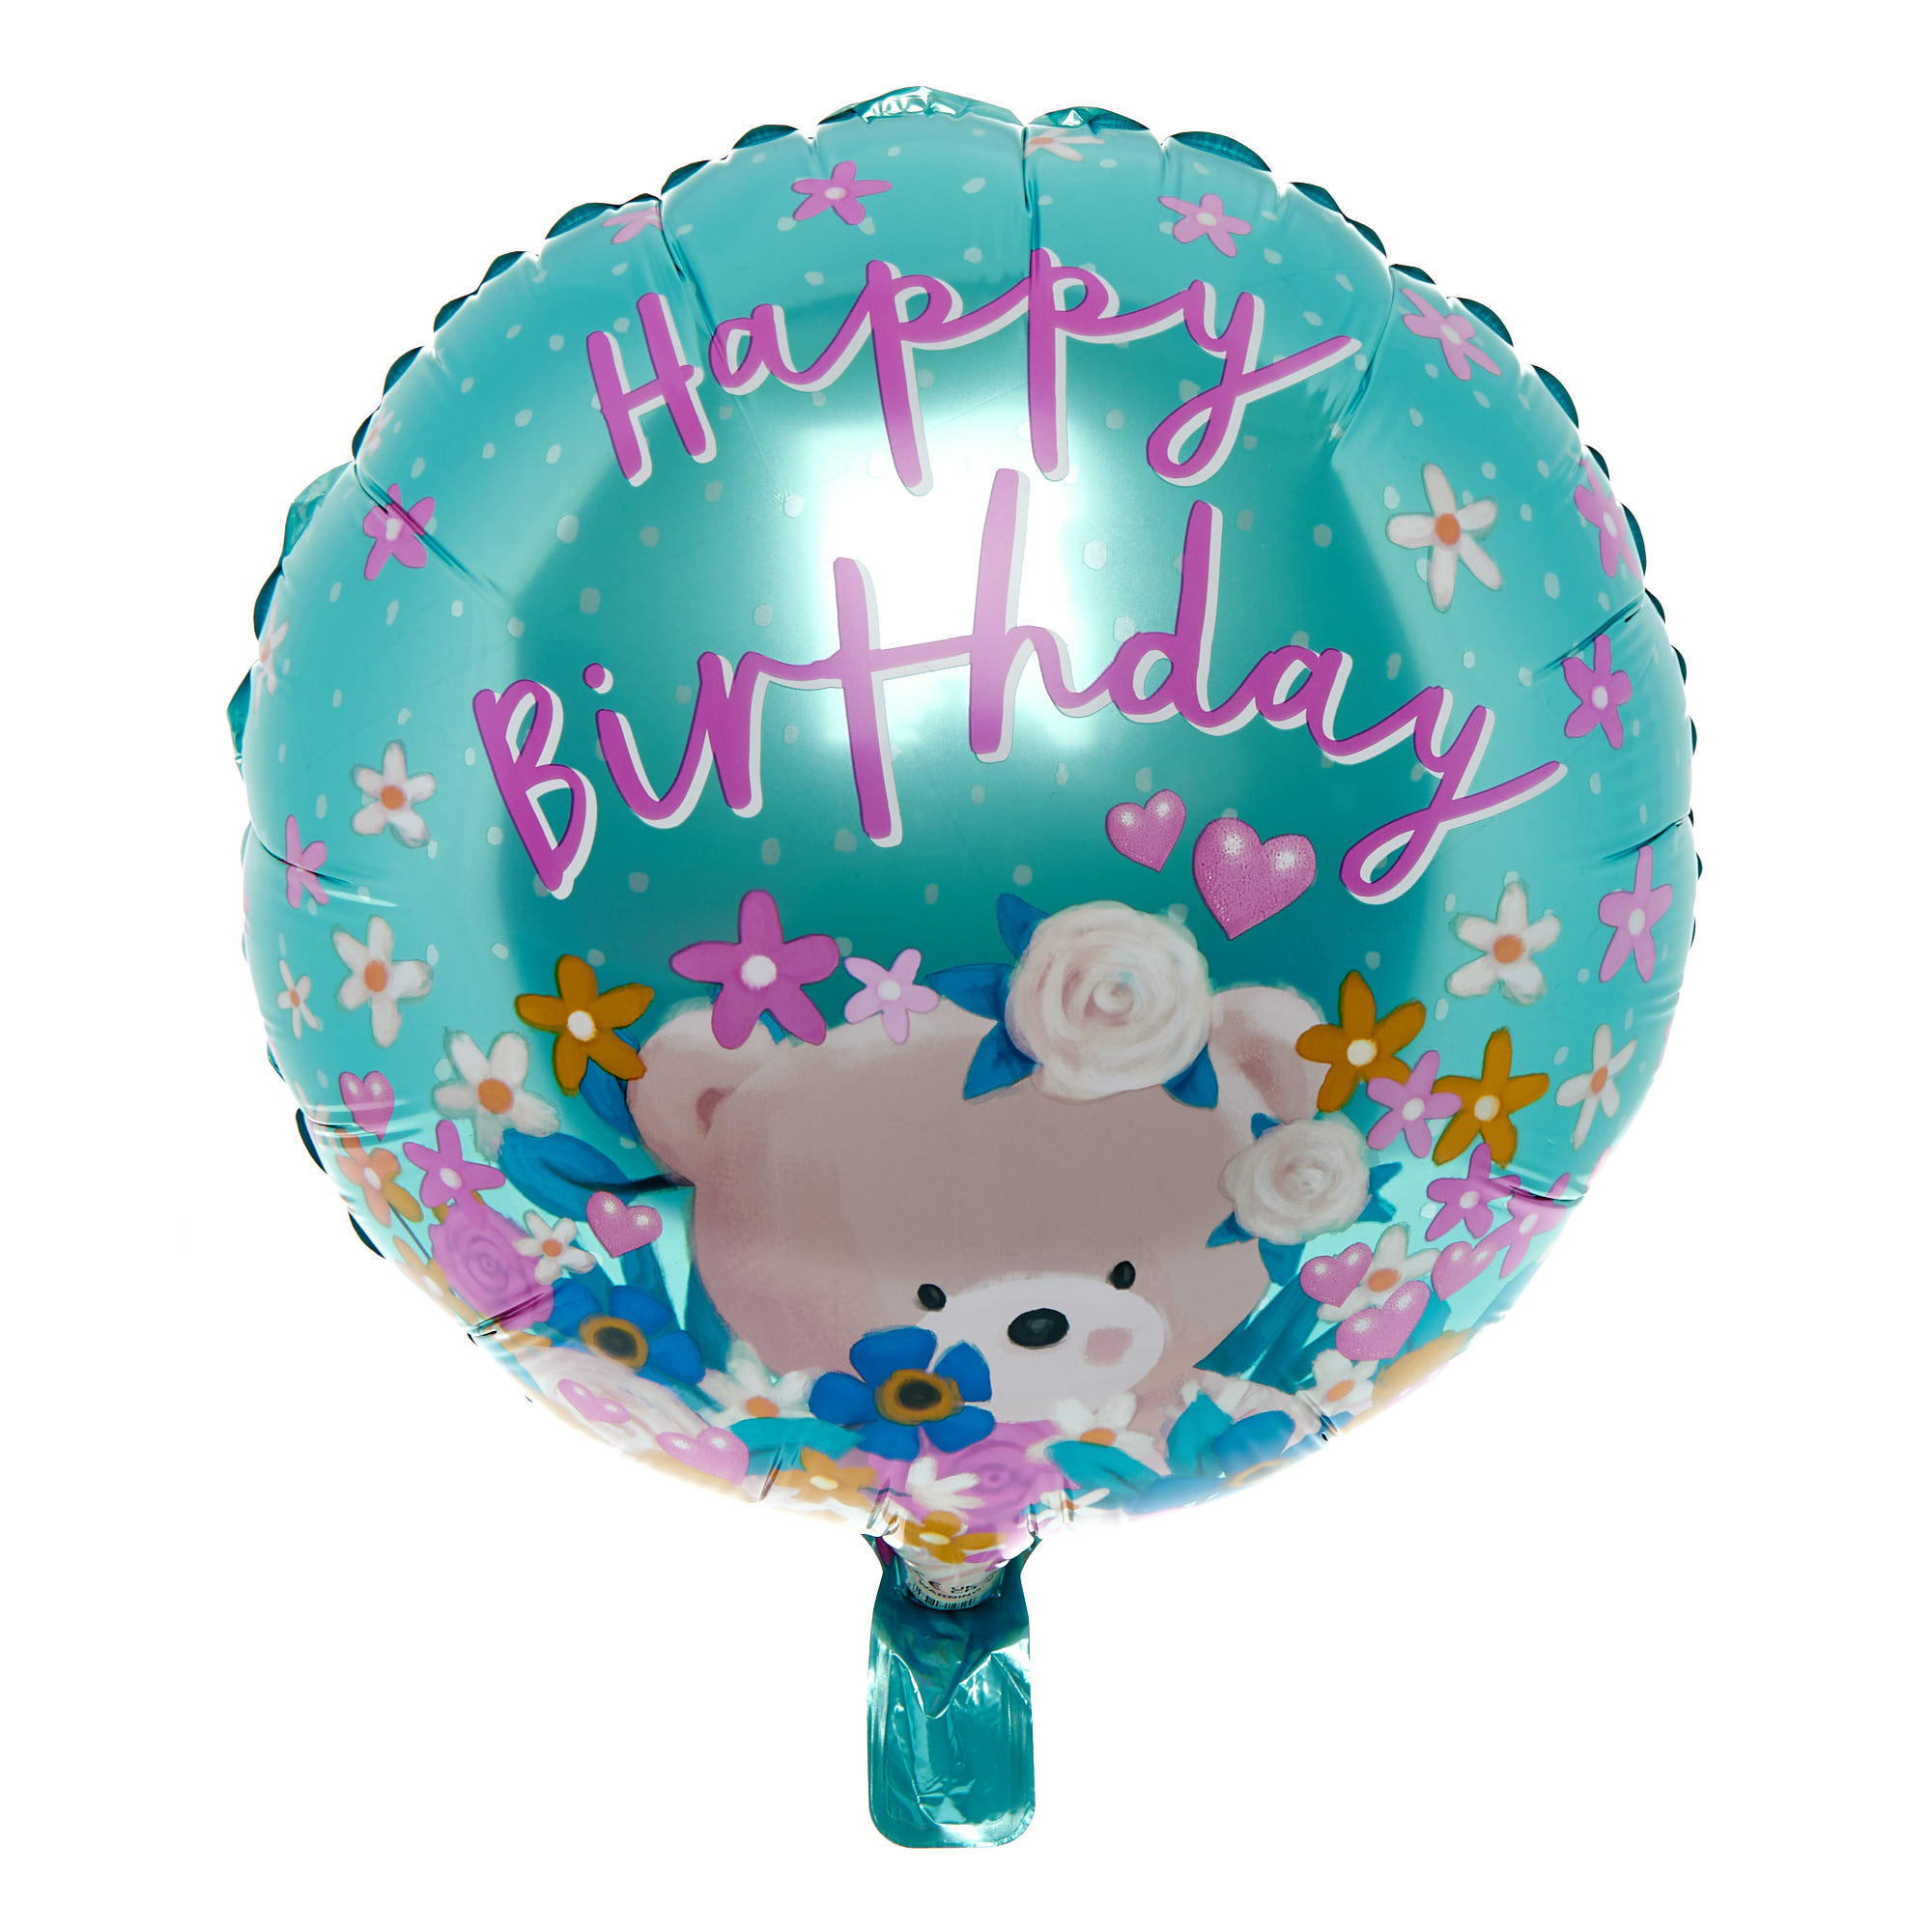 Hugs Happy Birthday Balloon Bouquet - DELIVERED INFLATED!